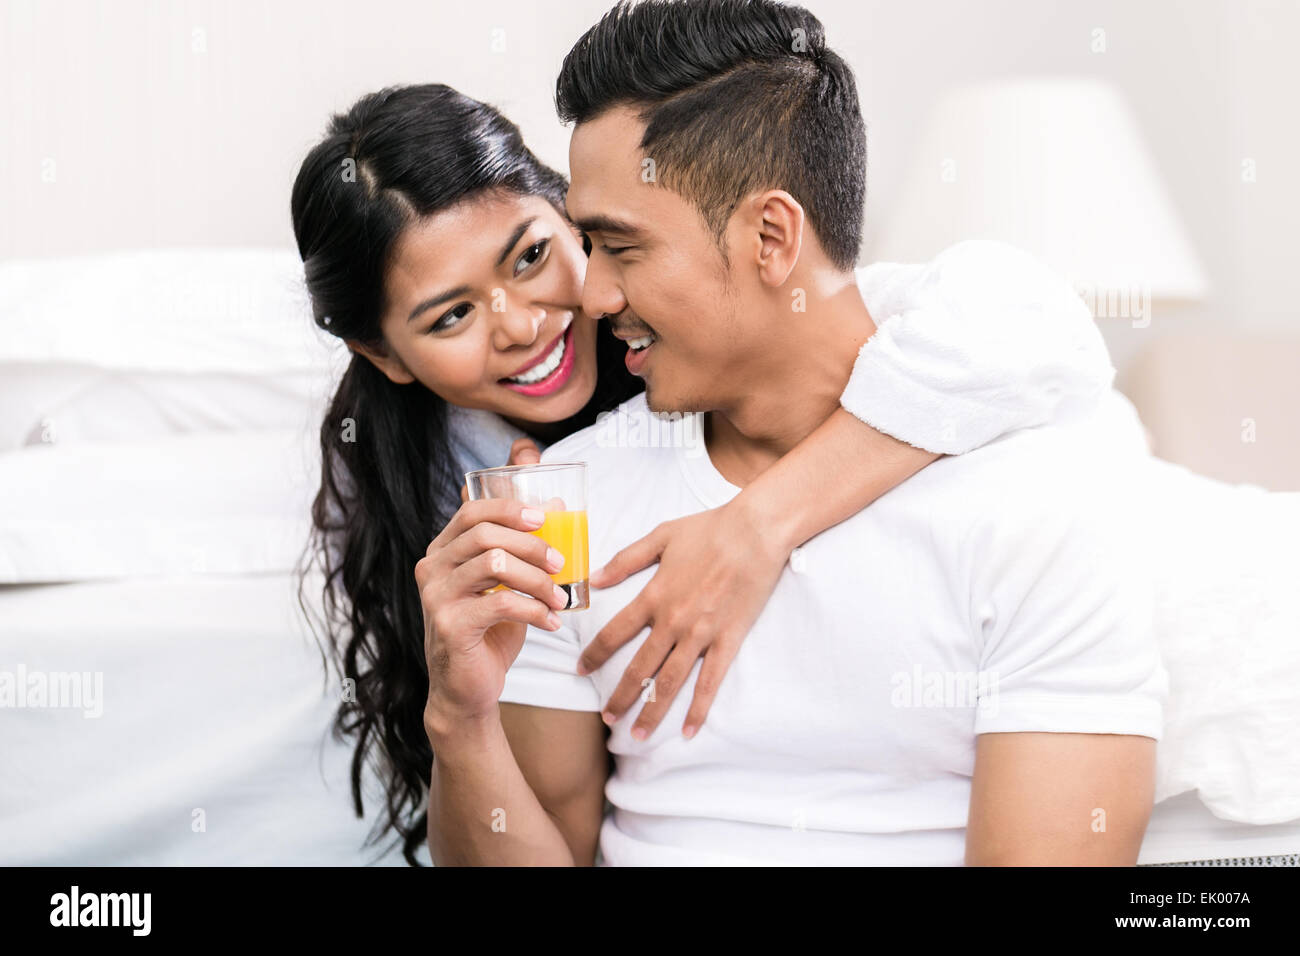 Asian couple, man and woman, embracing each other in bed Stock Photo